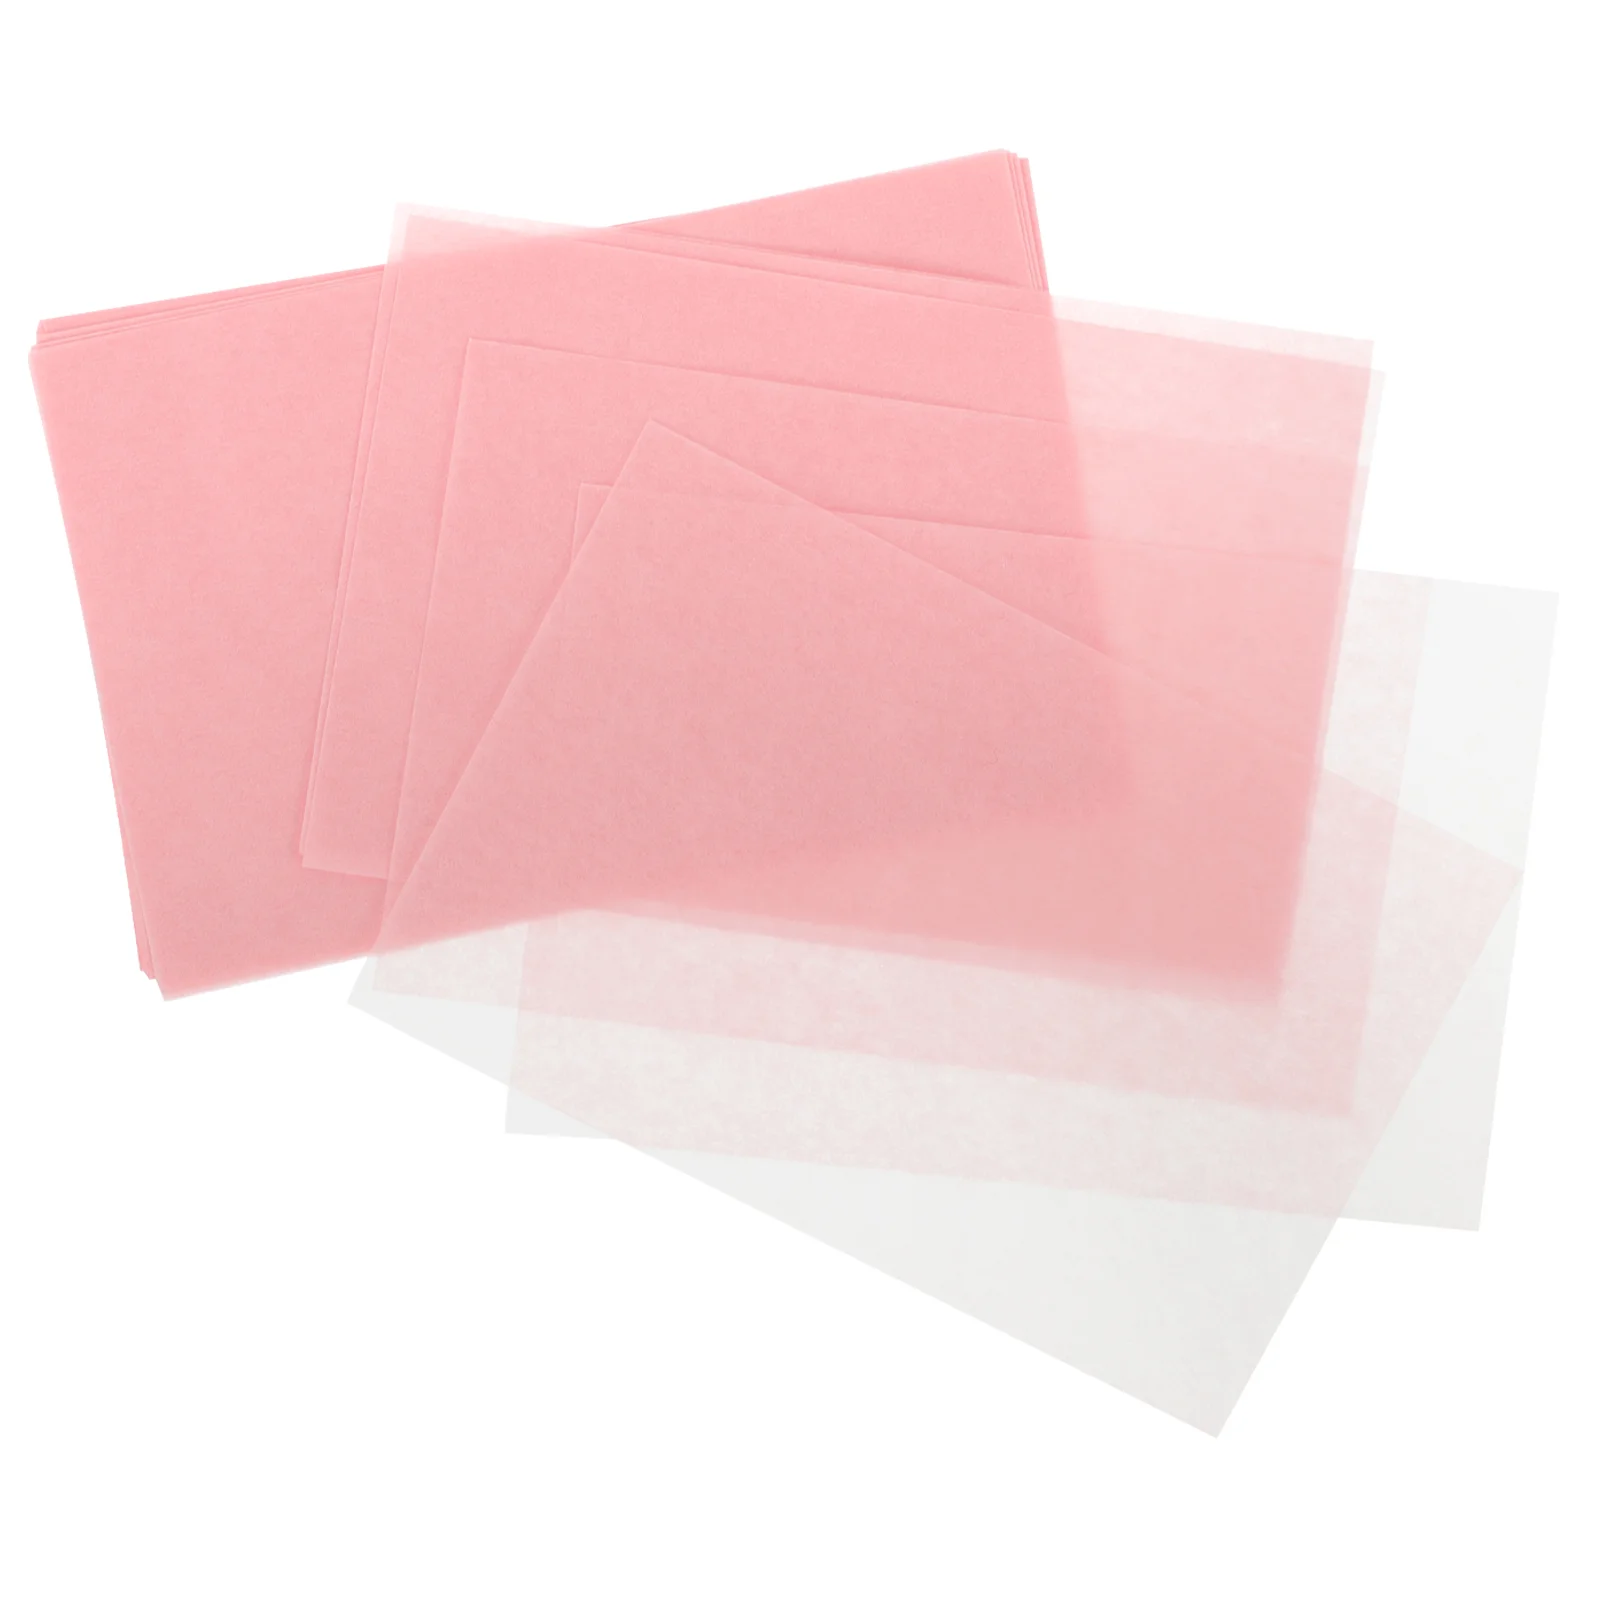 300pcs Oil Blotting Sheets Oil Absorbent Paper Facial Sucking Oil Tissues Face Oil Control Paper (Aloe Fragrance 3 Boxes) 100 pcs blue oil control oil absorbing paper film tissue makeup blotting paper facial cleaner facial beauty tools